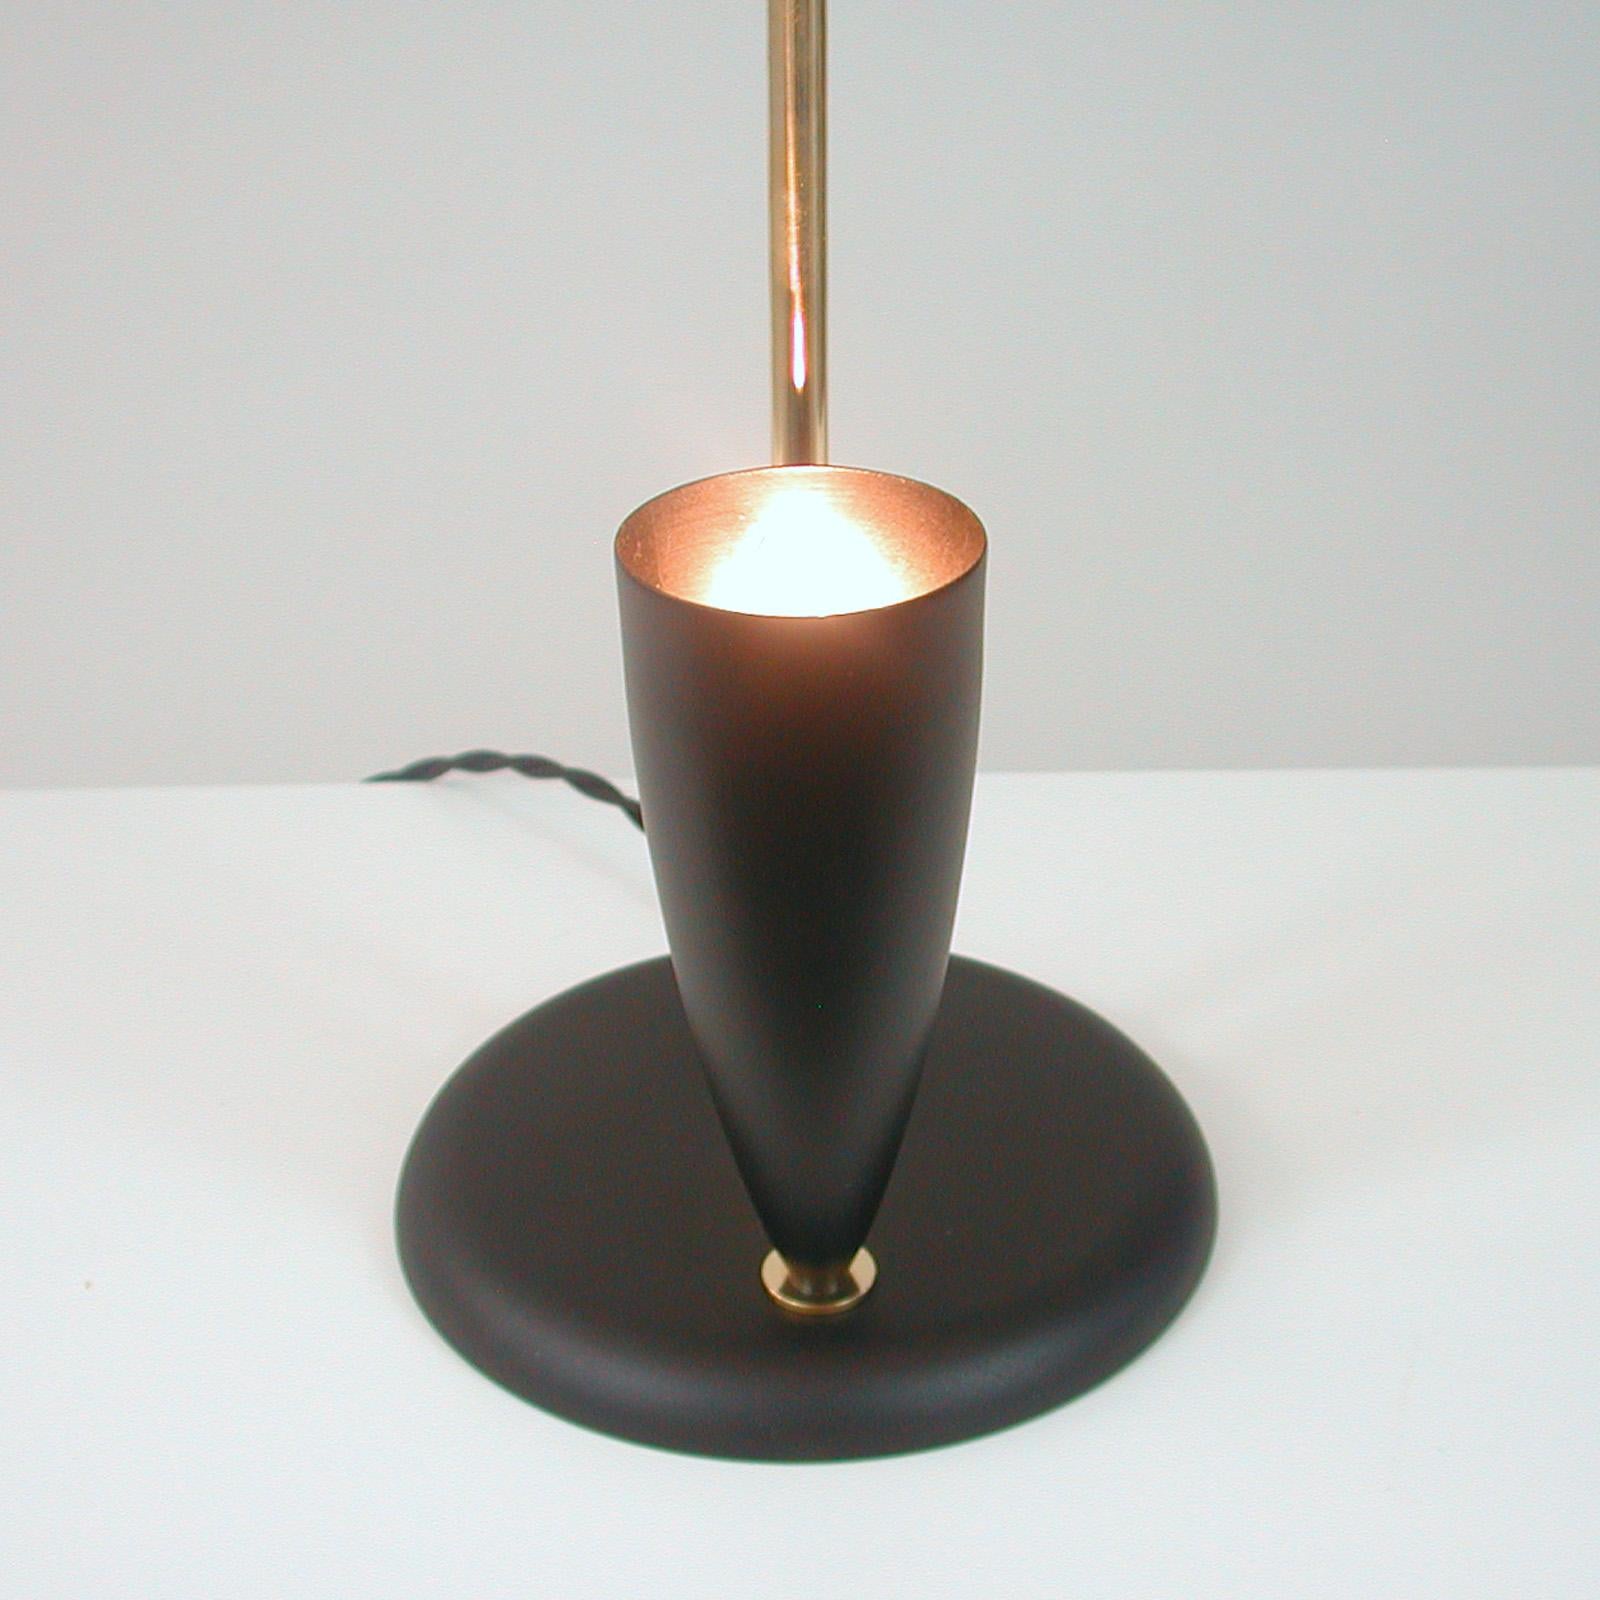 French Midcentury Reflecting Black and Brass Table Lamp, 1950s For Sale 4